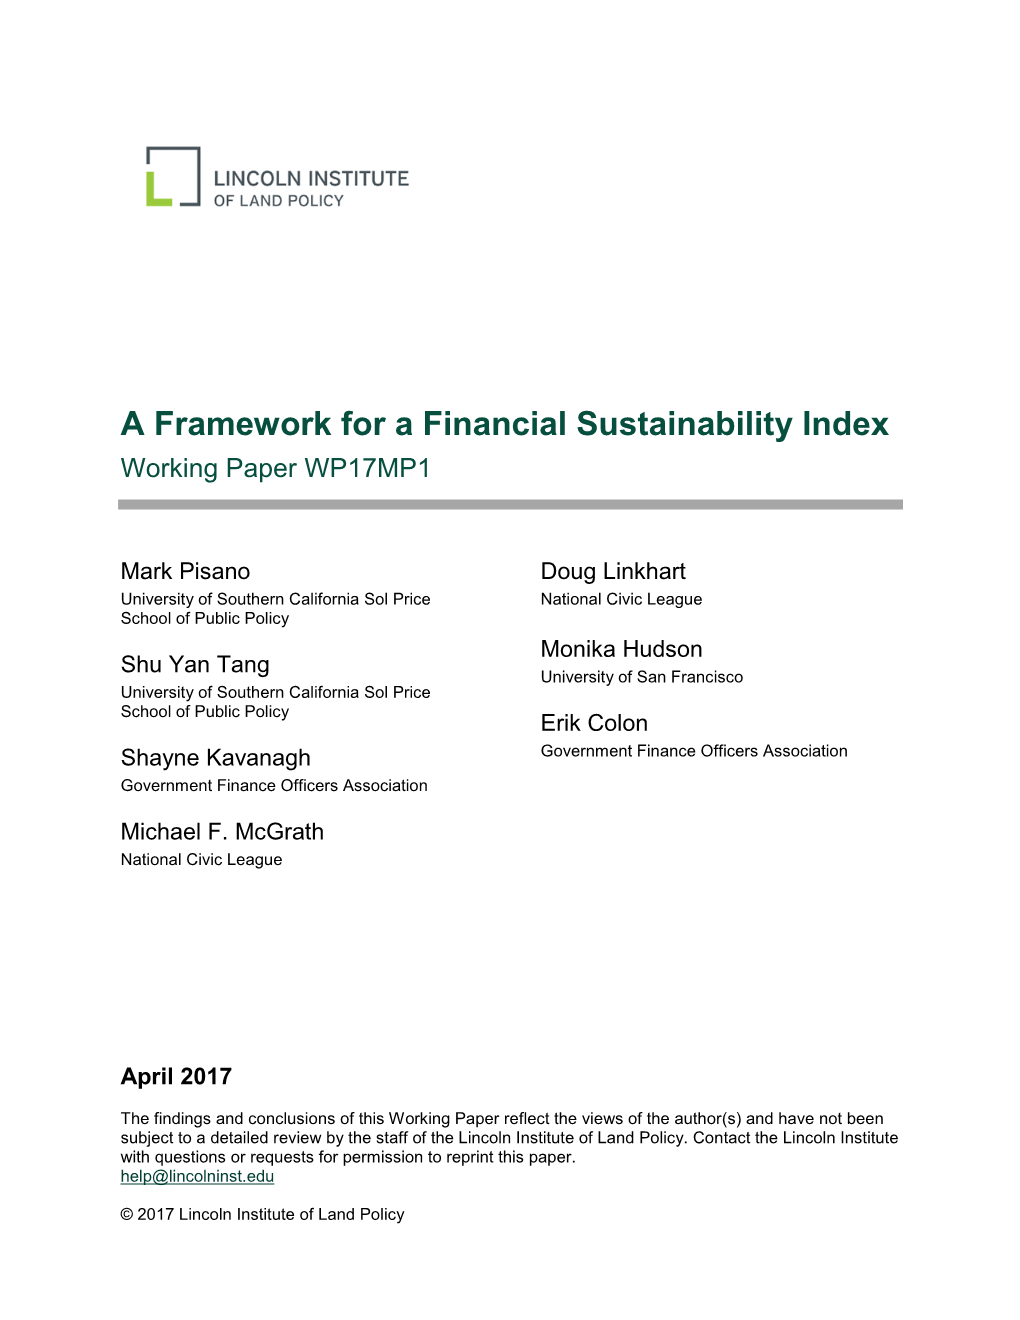 A Framework for a Financial Sustainability Index Working Paper WP17MP1